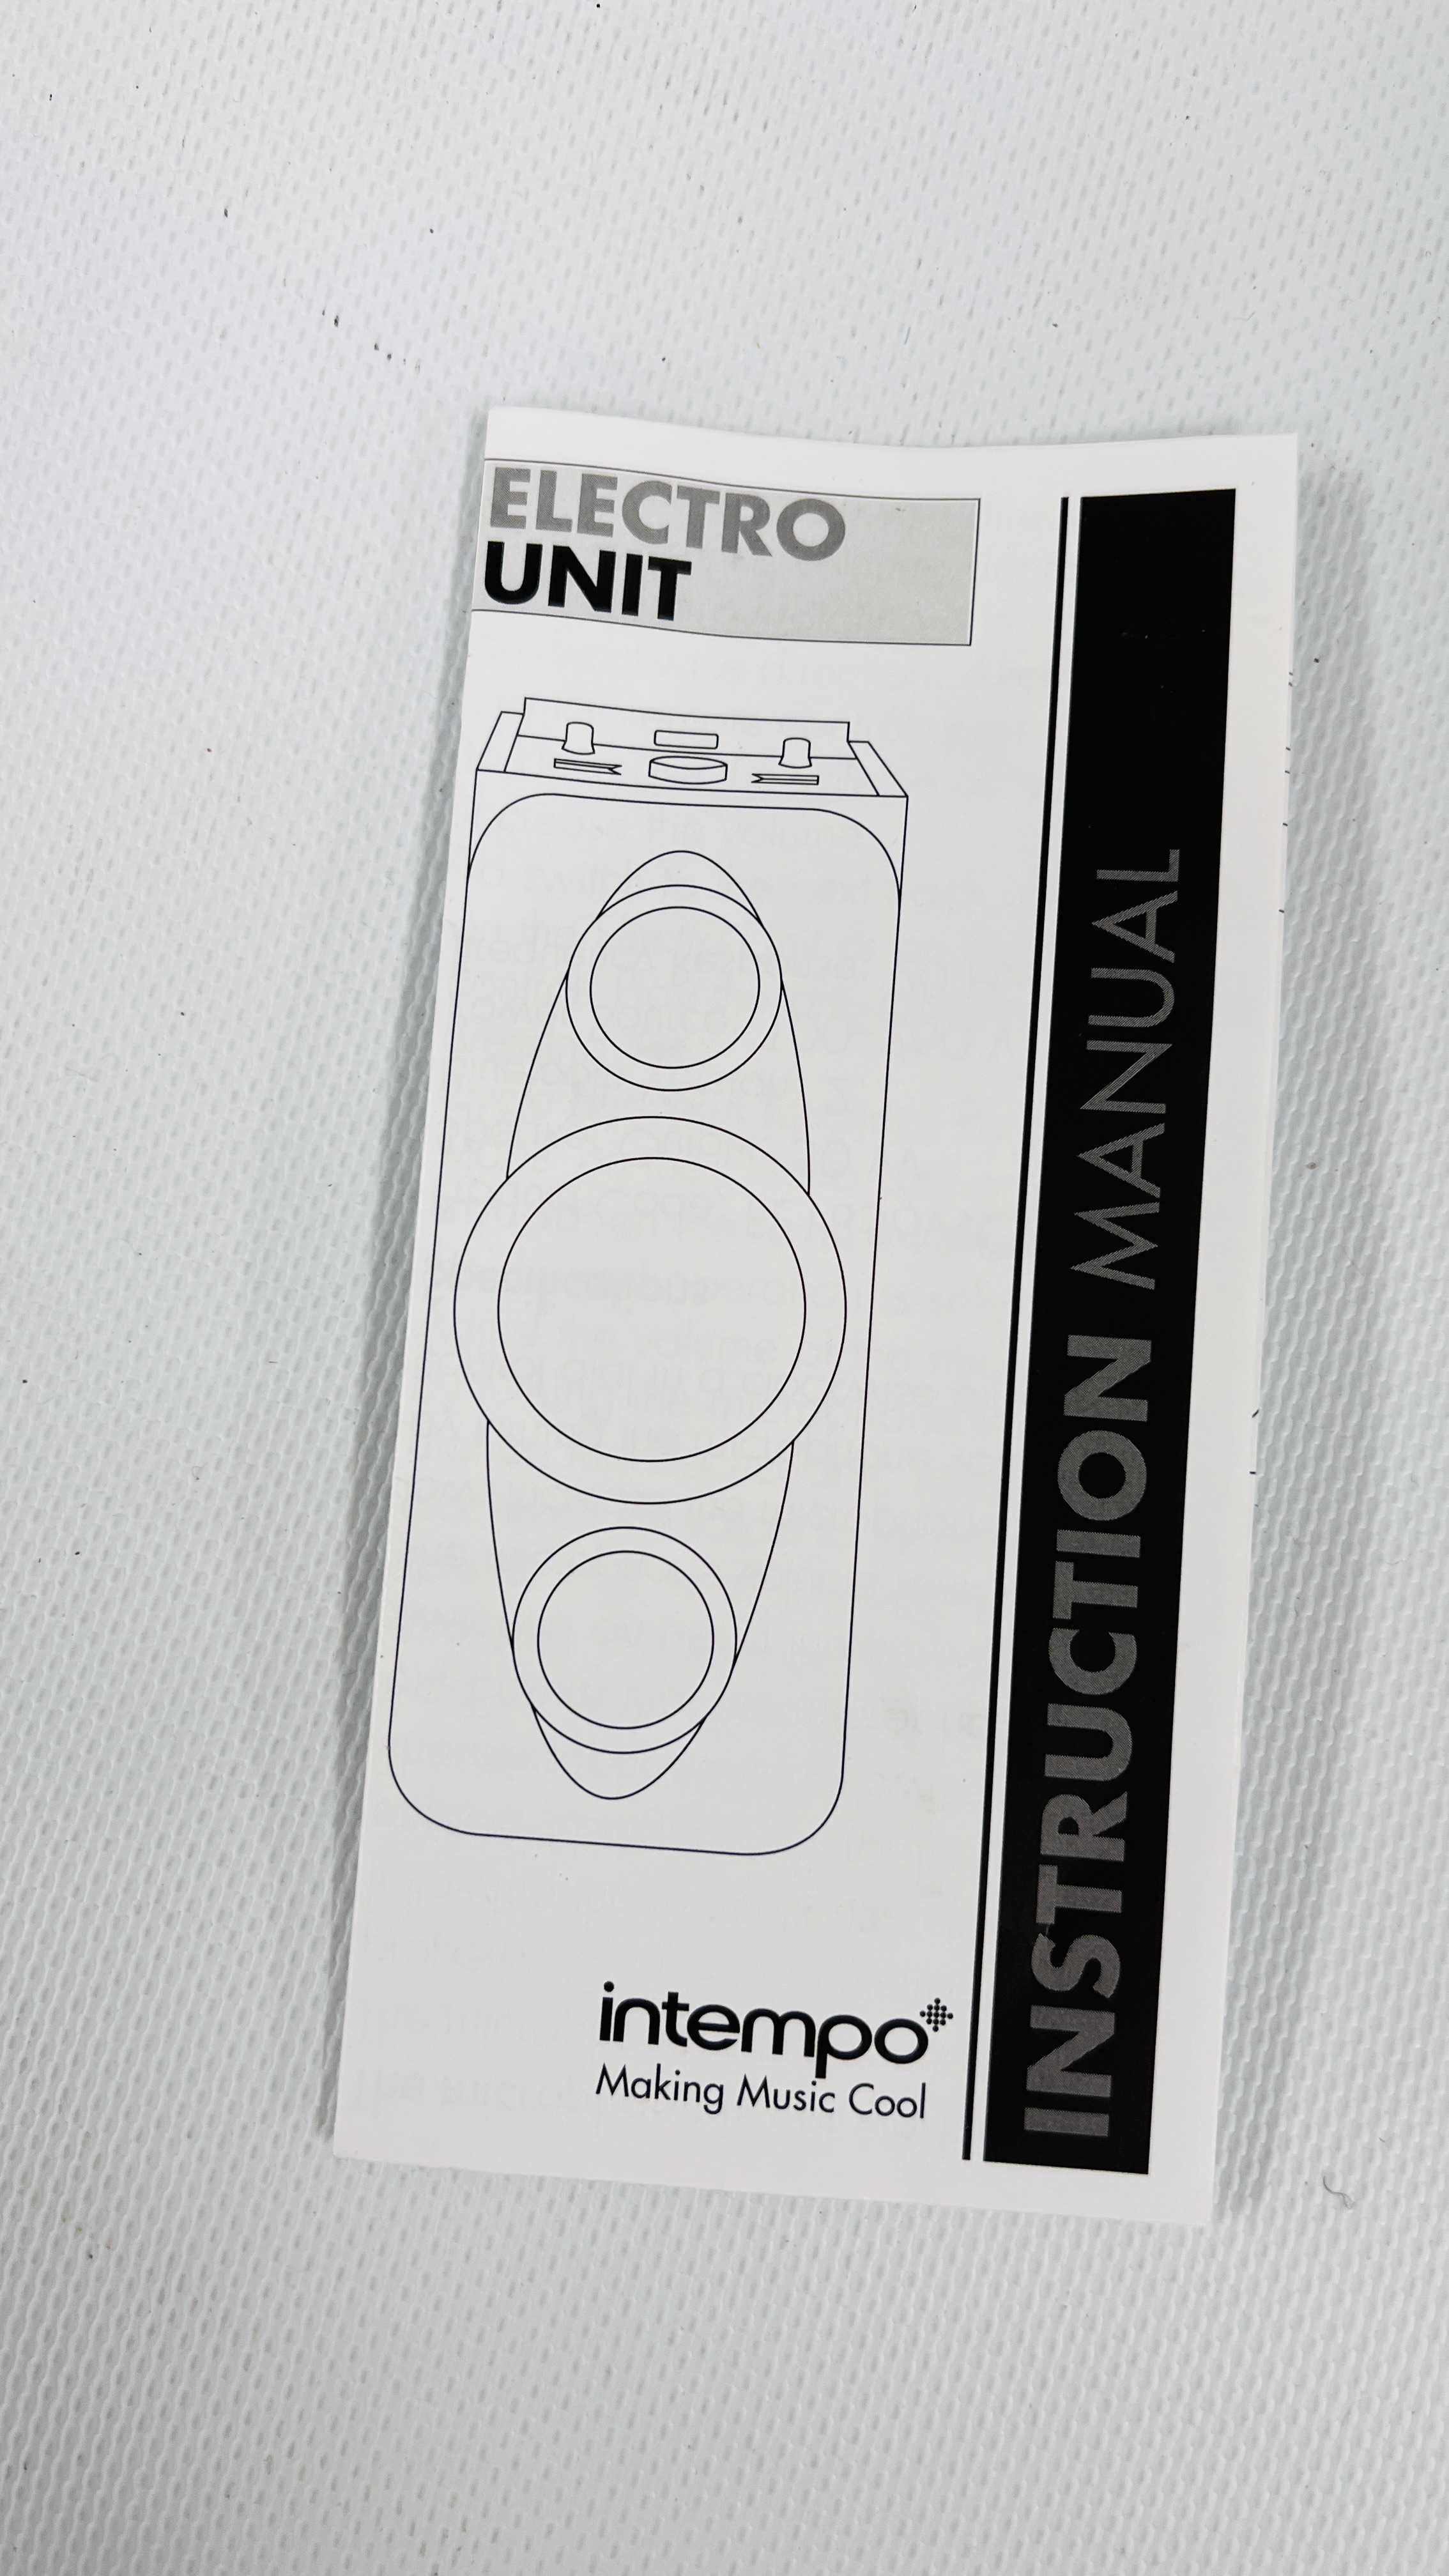 A BOXED INTEMPO ELECTRO UNIT LOUD SPEAKER - SOLD AS SEEN - Image 11 of 11